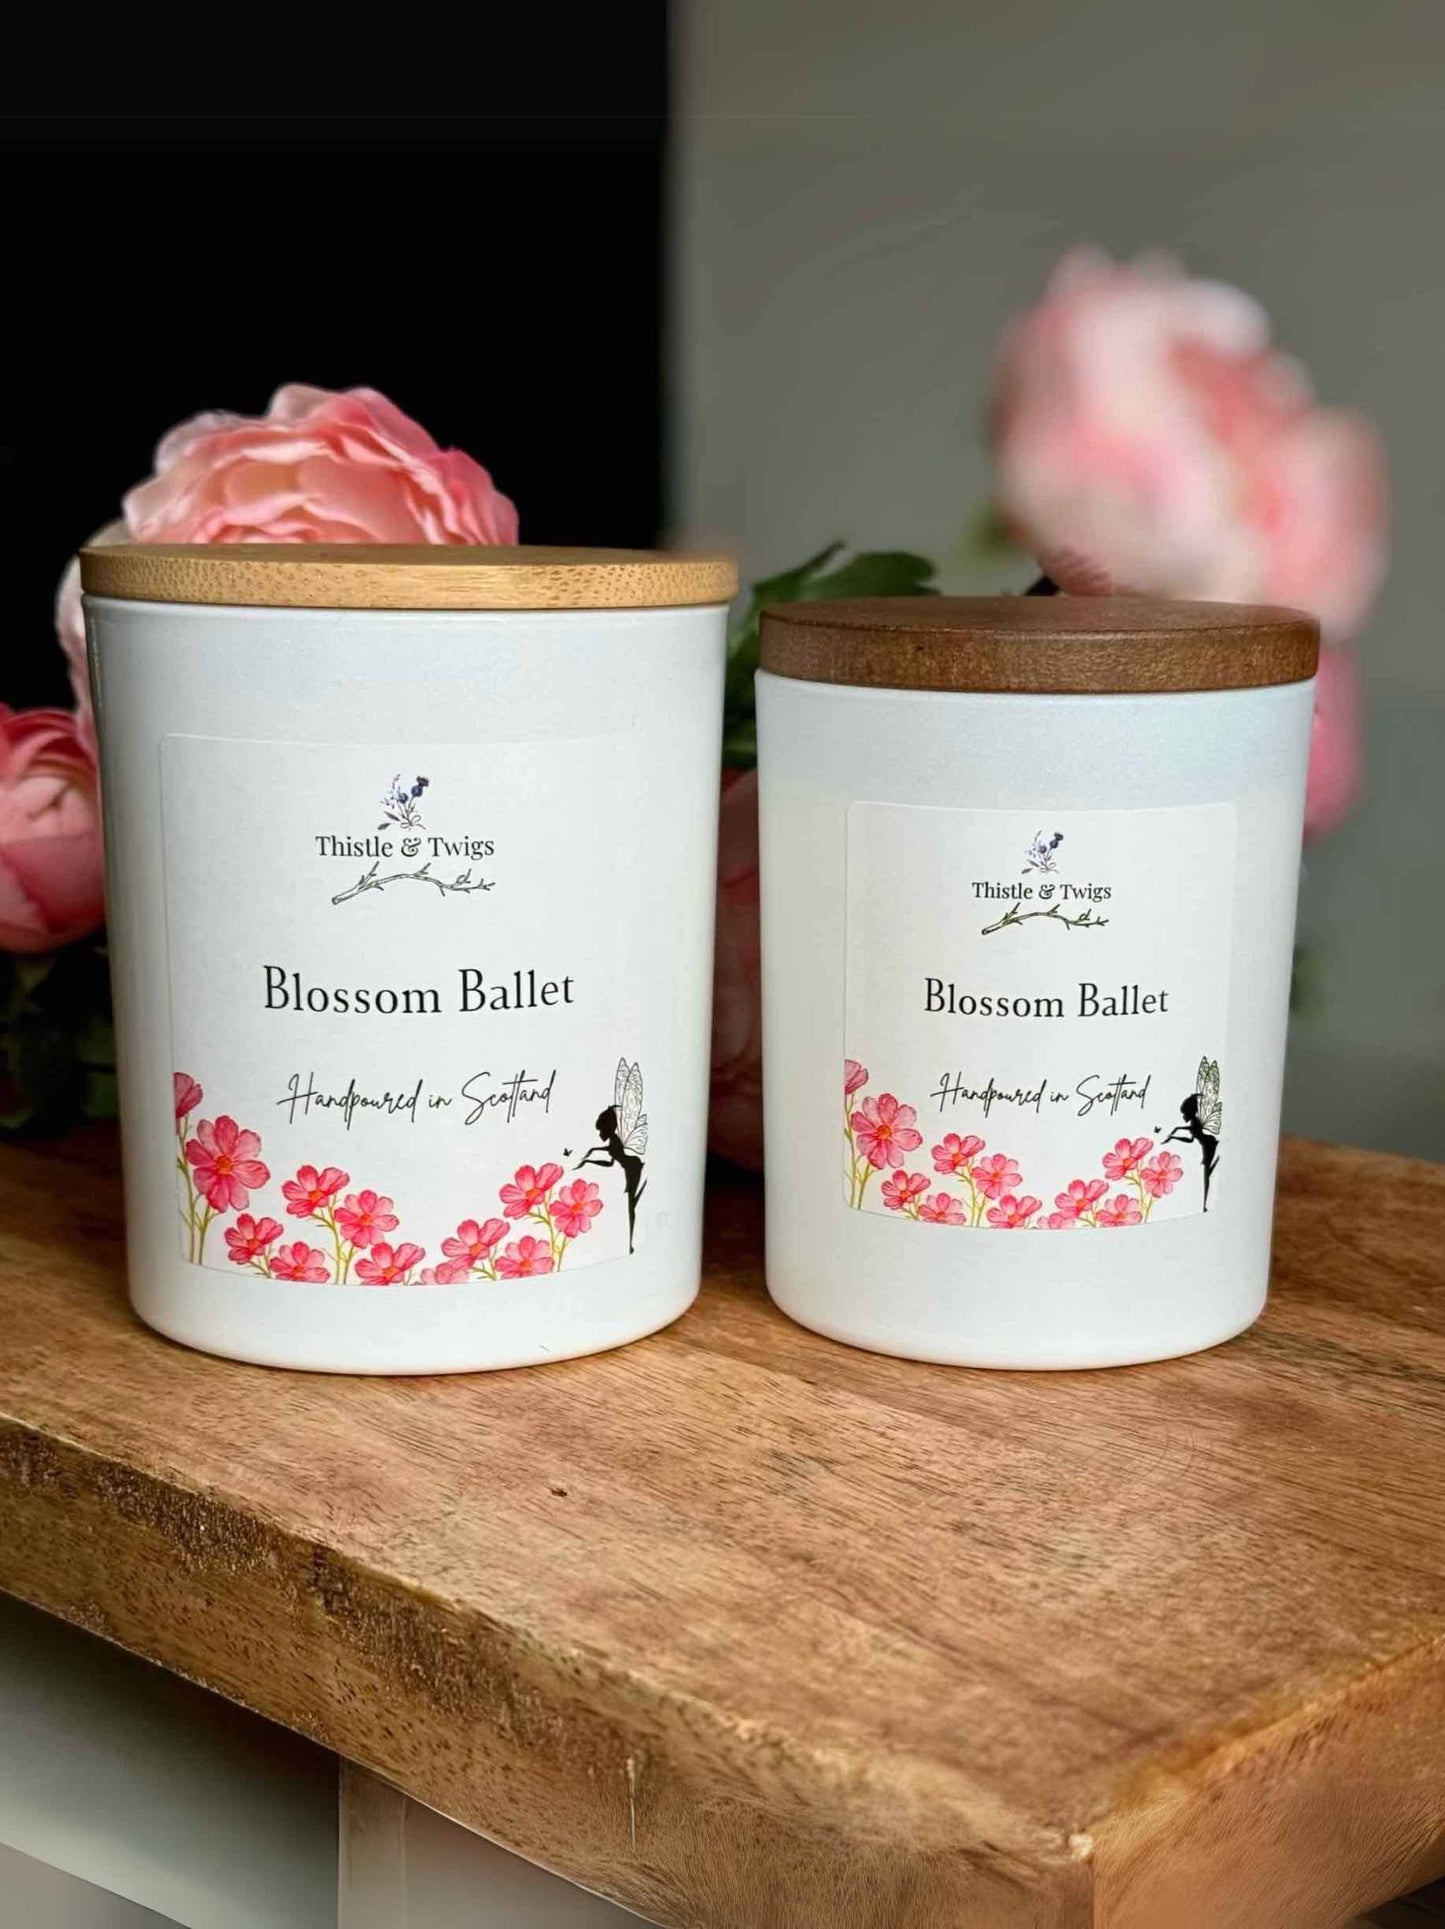 Blossom Ballet Soy Wax Candle